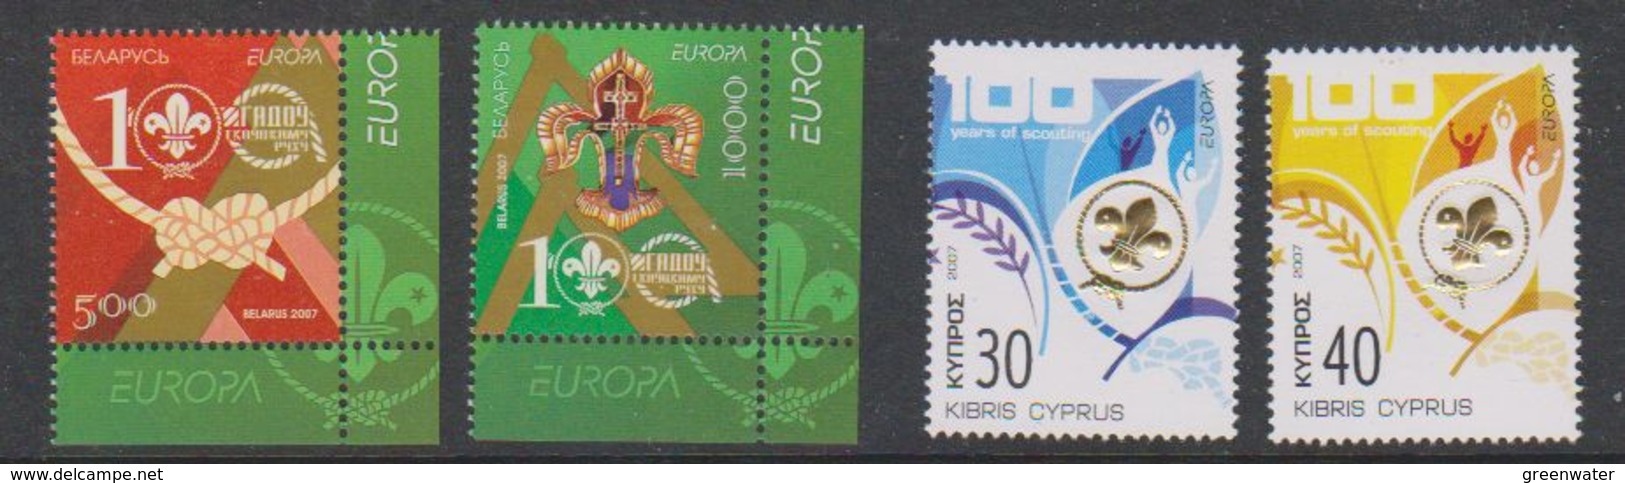 Europa Cept 2007 Yearset (see scan, what you see is what you get) ** mnh (39303)